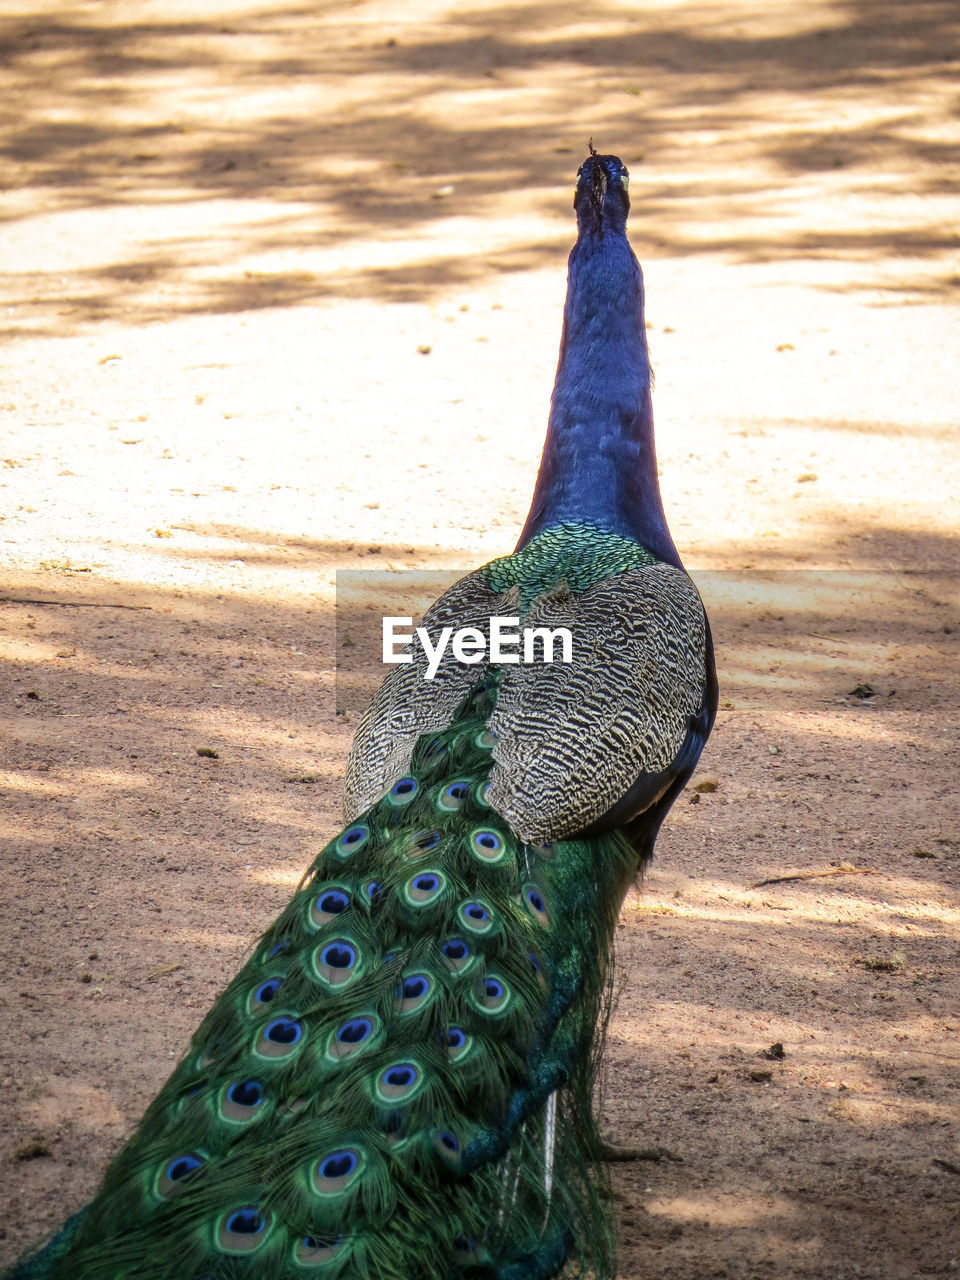 CLOSE-UP OF A PEACOCK ON FIELD